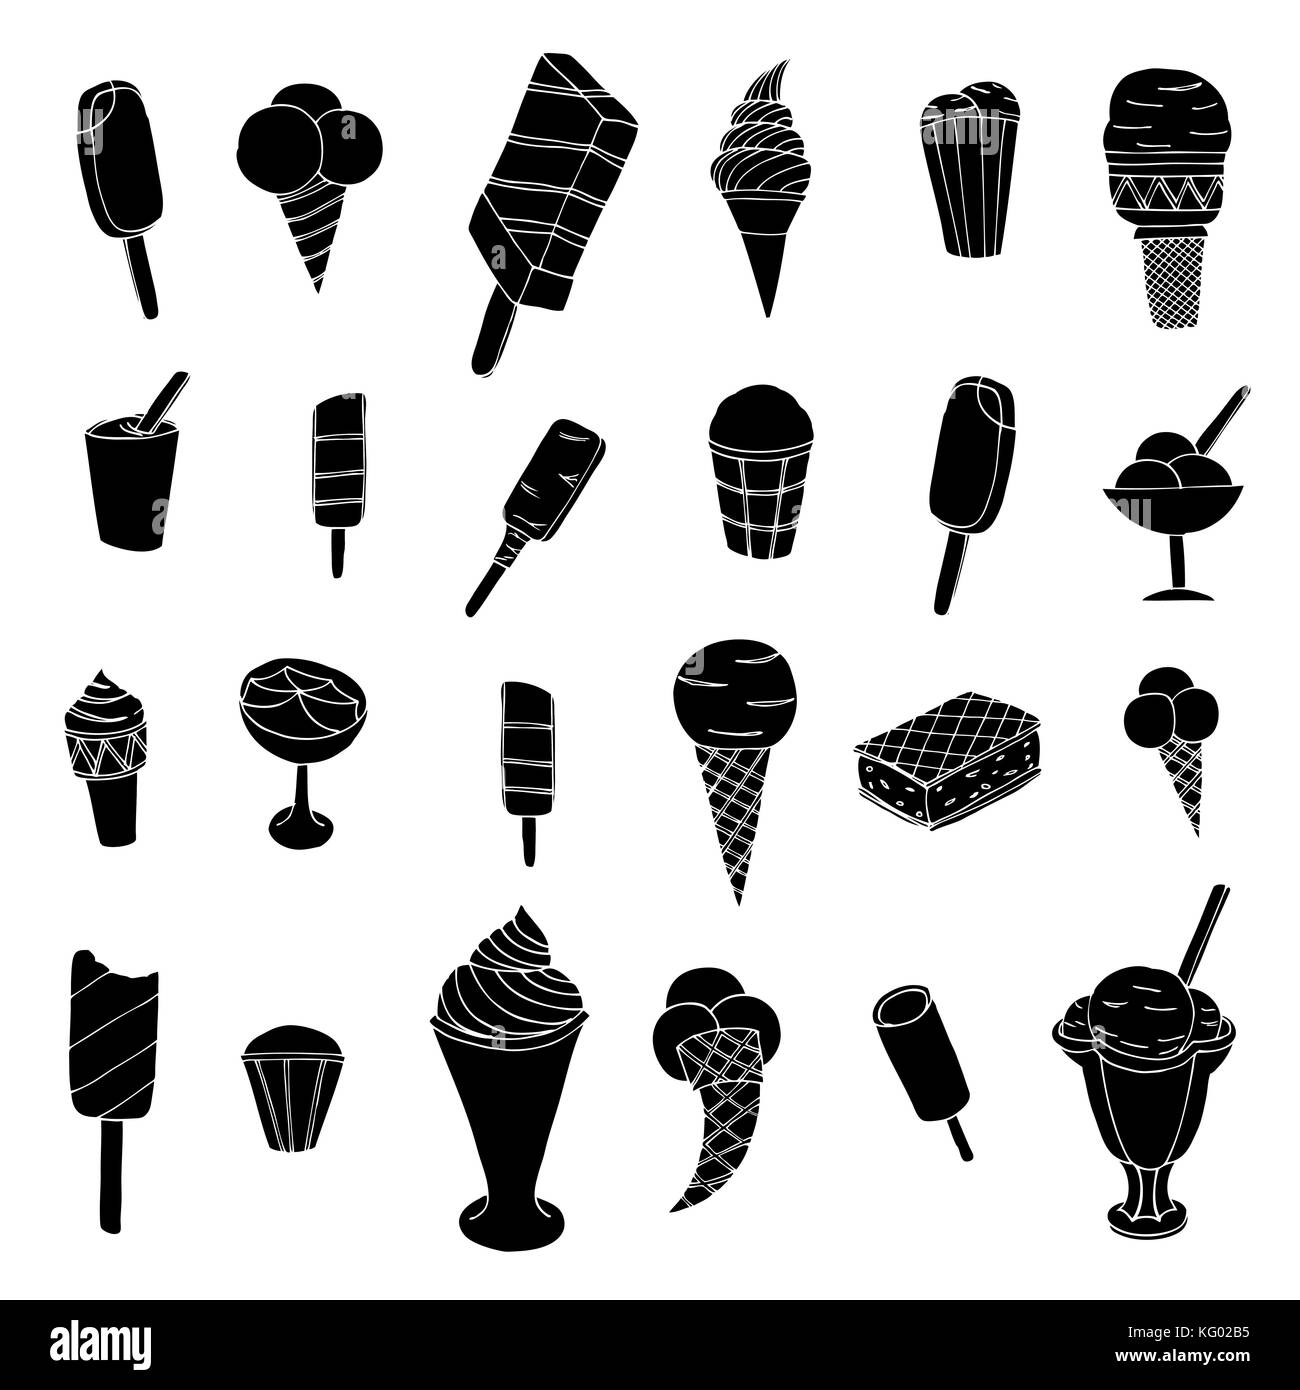 Collection of cute vector ice cream. Cones and ice creams with different flavours made in doodle style. Stock Vector